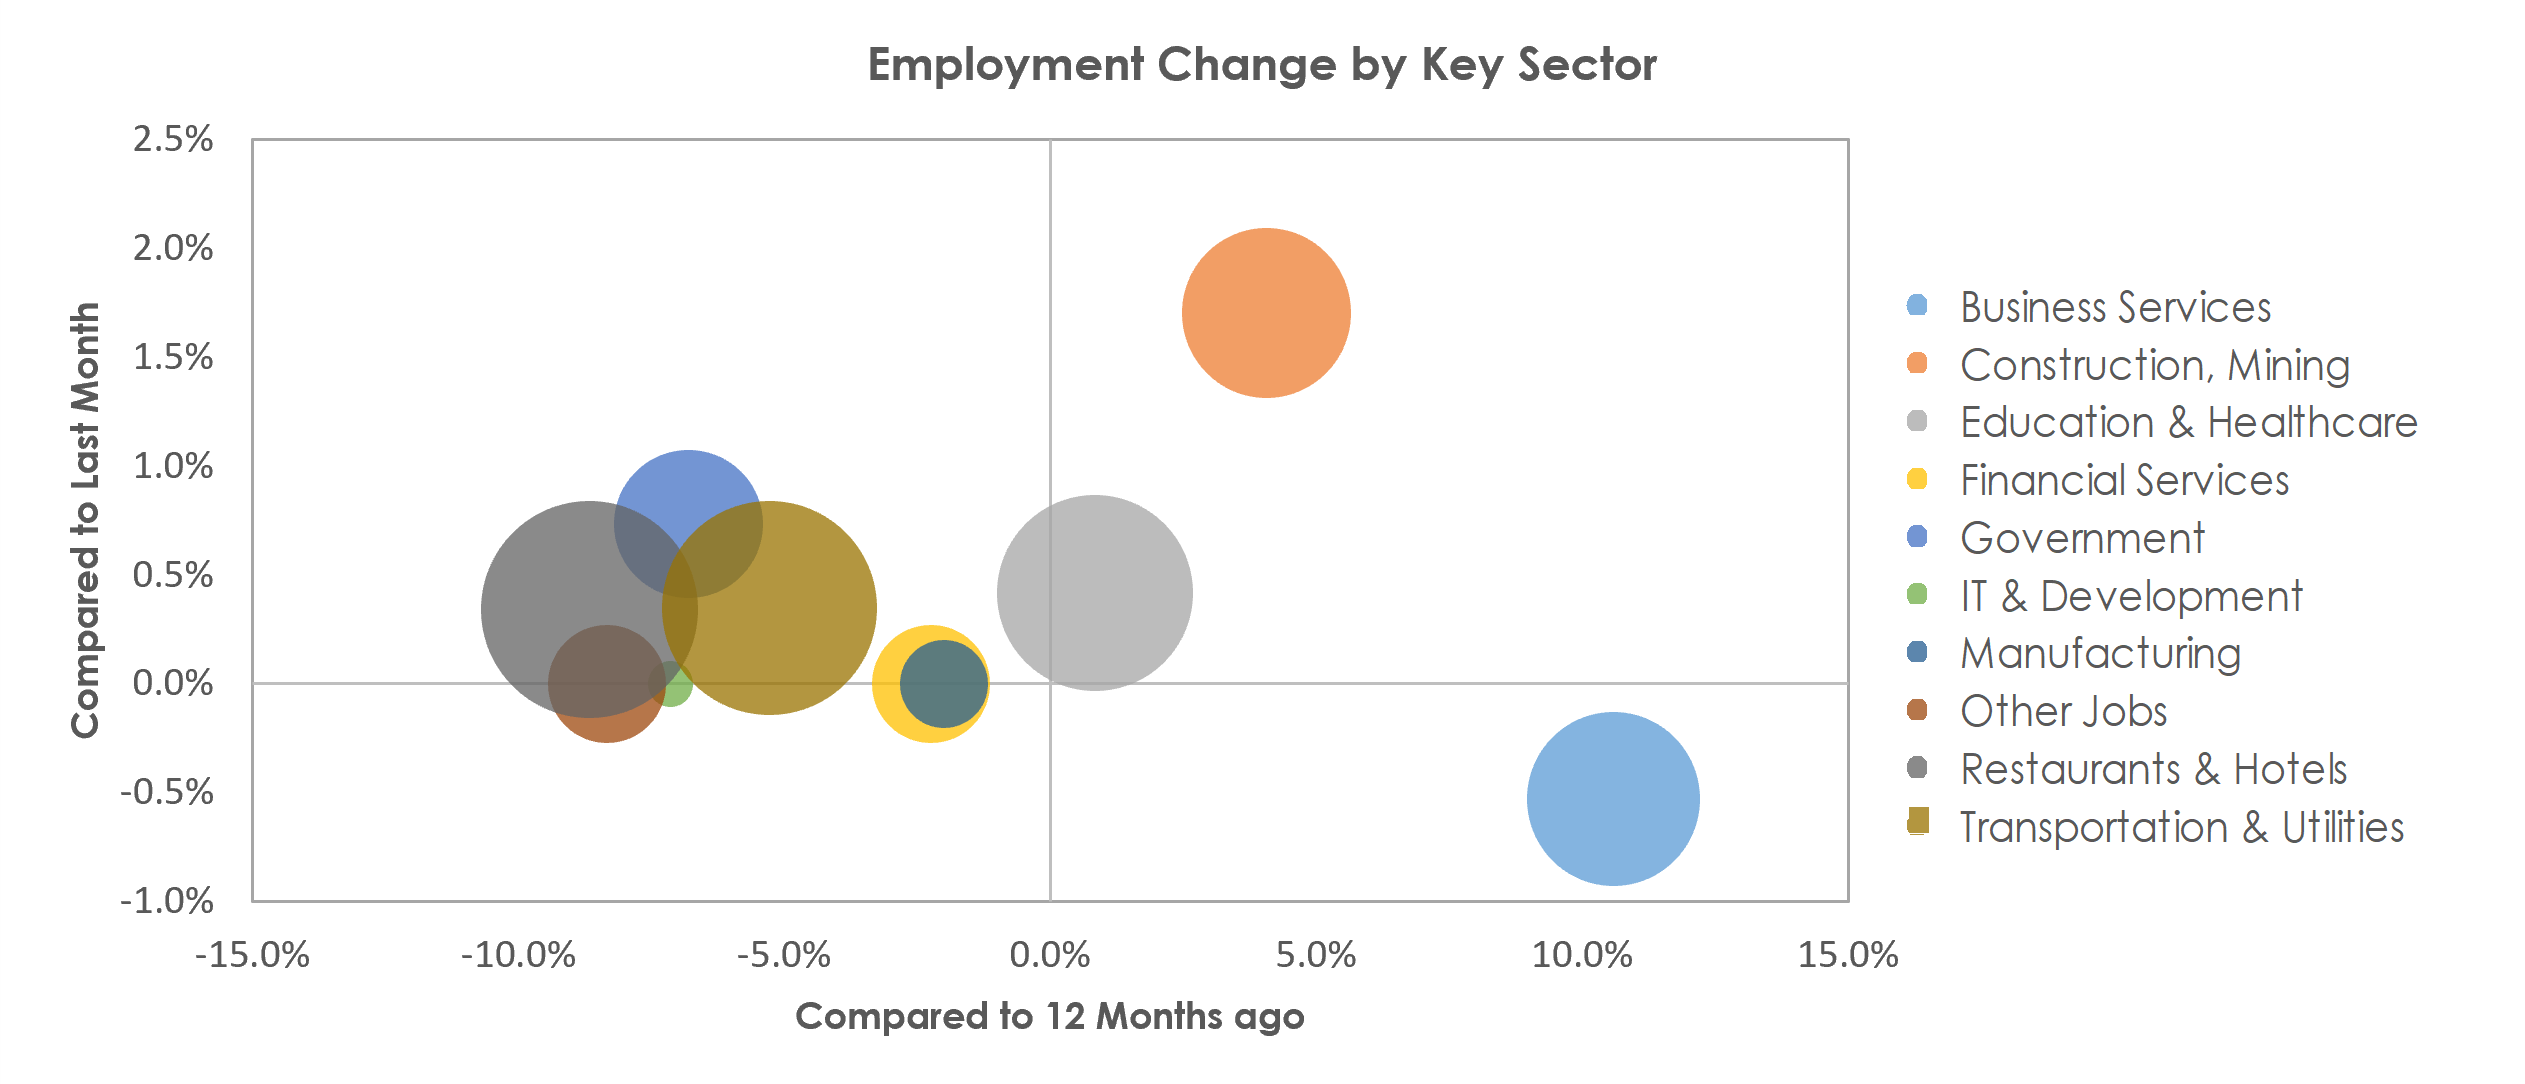 Naples-Immokalee-Marco Island, FL Unemployment by Industry March 2021